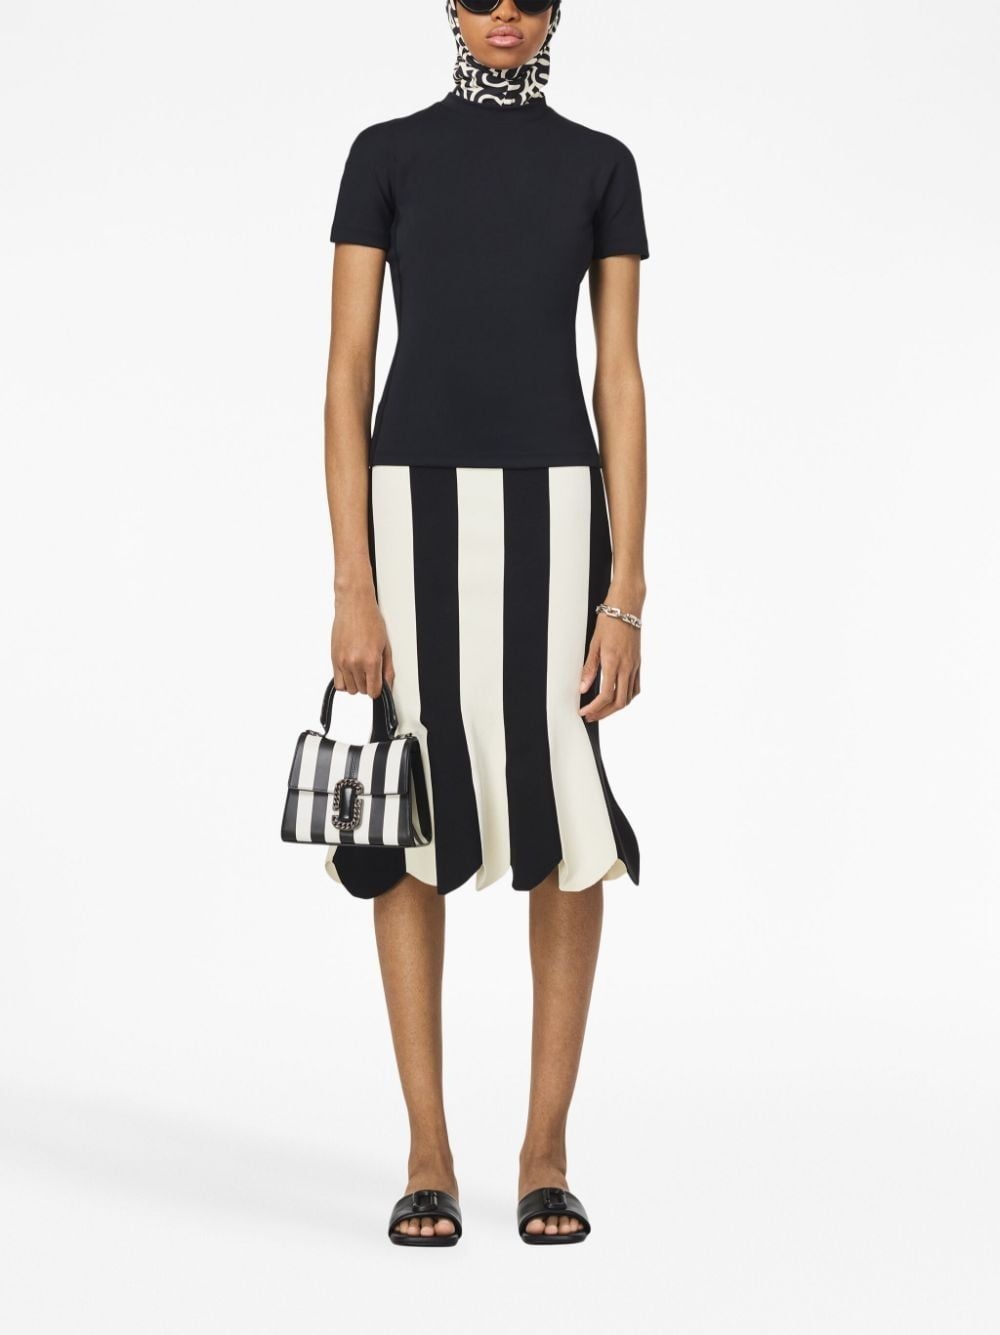 THE STRIPED ST. MARC MINI TOP HANDLE - 6